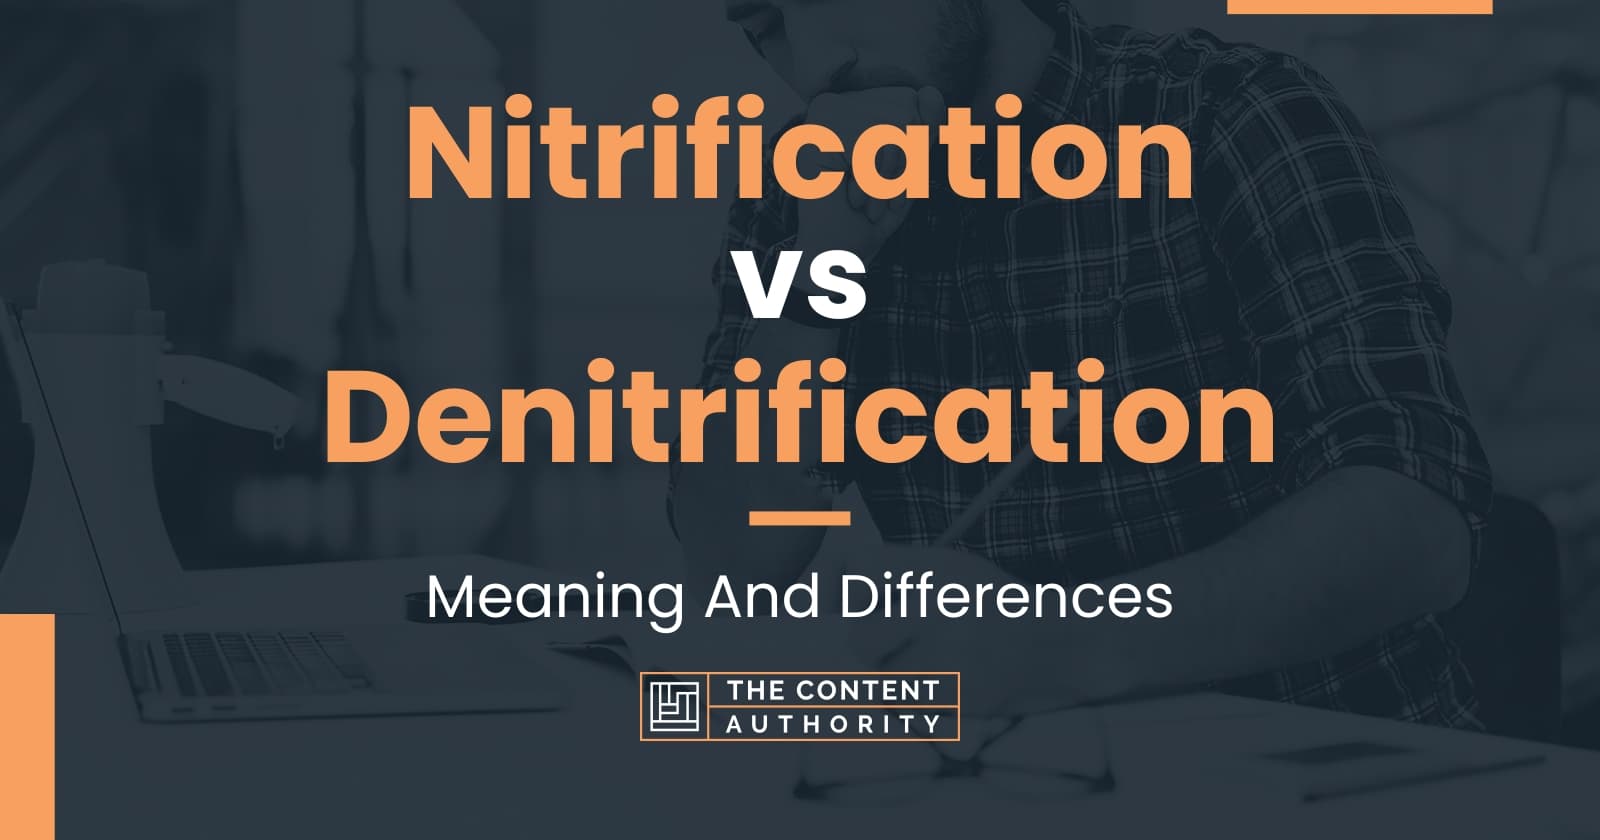 Nitrification vs Denitrification: Meaning And Differences